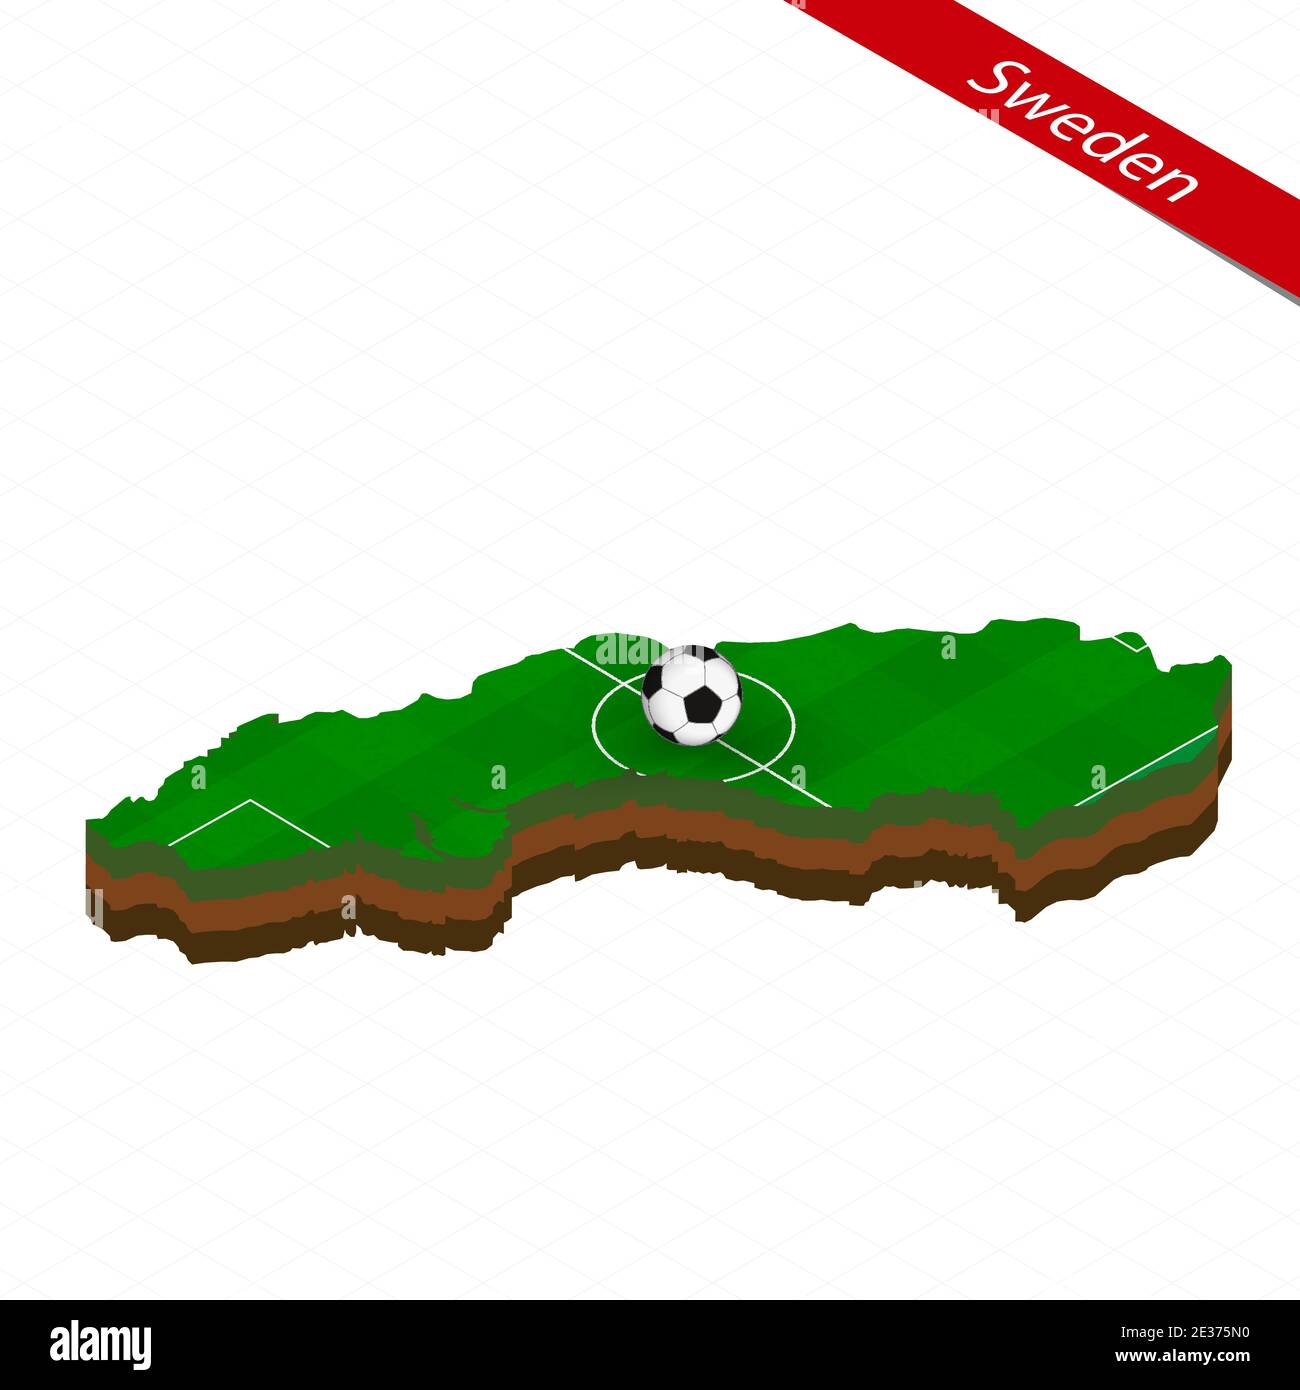 Isometric map of Sweden with soccer field. Football ball in center of football pitch. Vector soccer illustration. Stock Vector